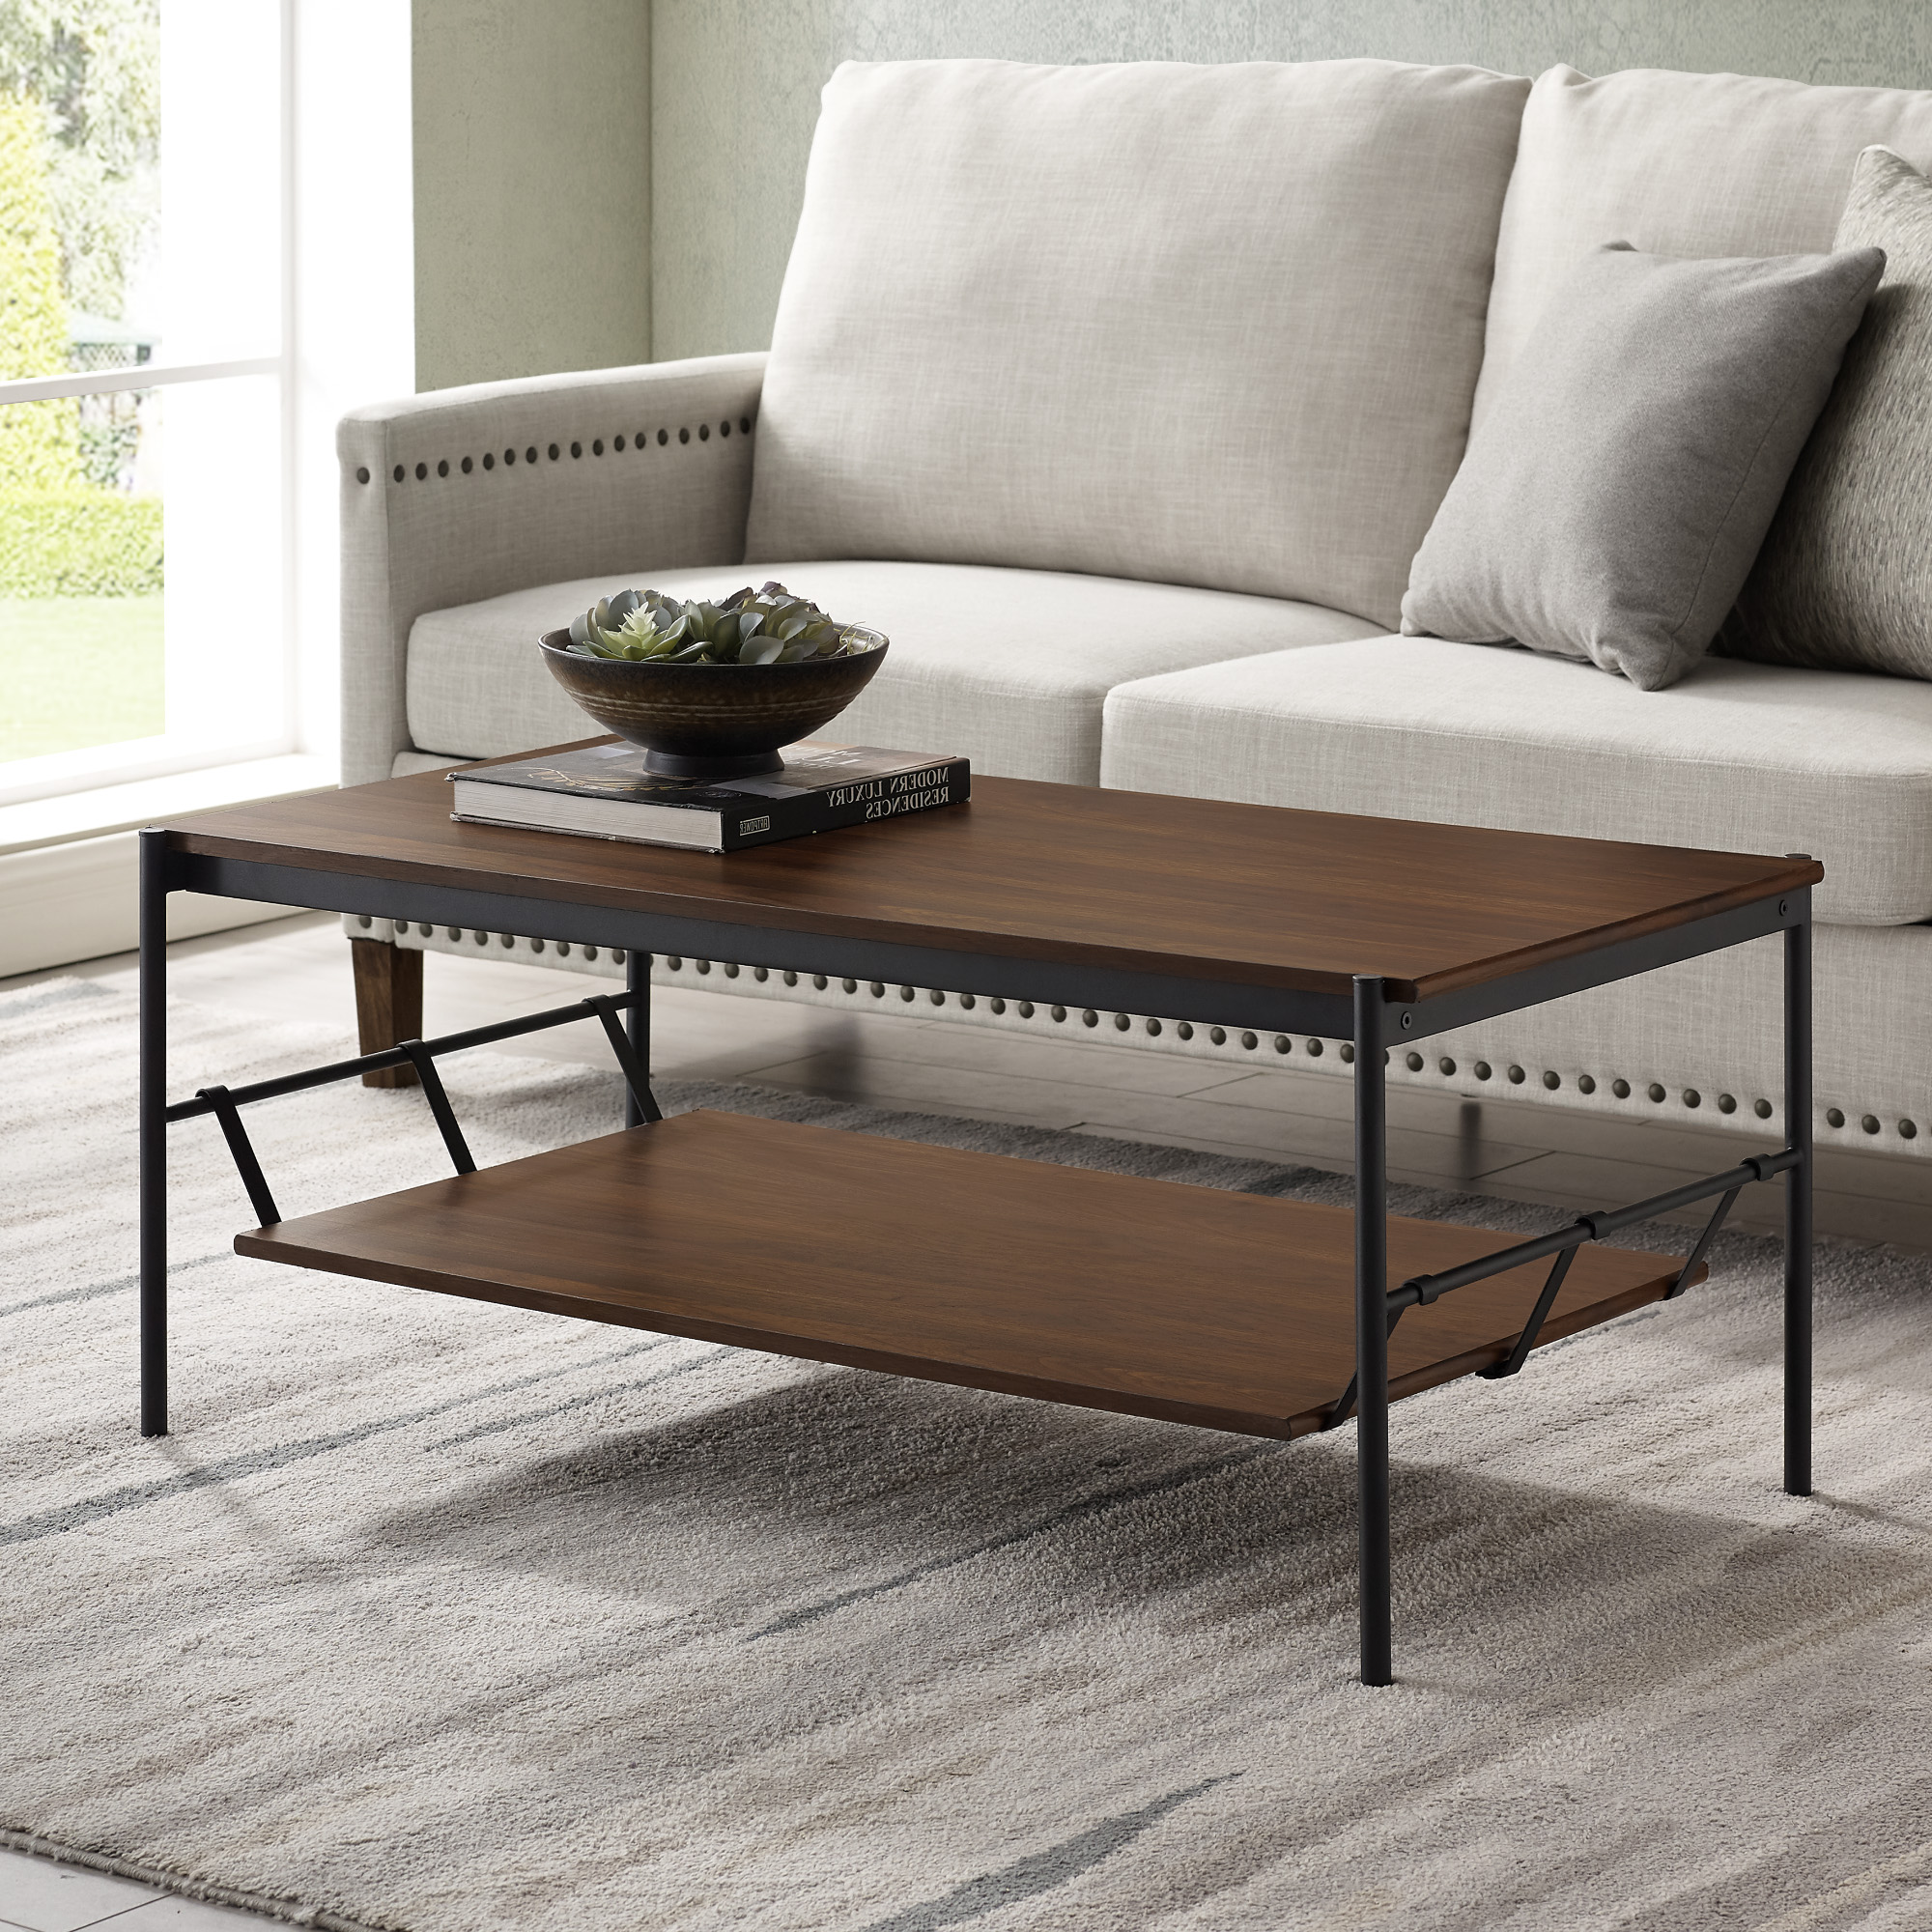 Manor Park Modern Coffee Table with Removable Shelf, Dark Walnut - image 1 of 6